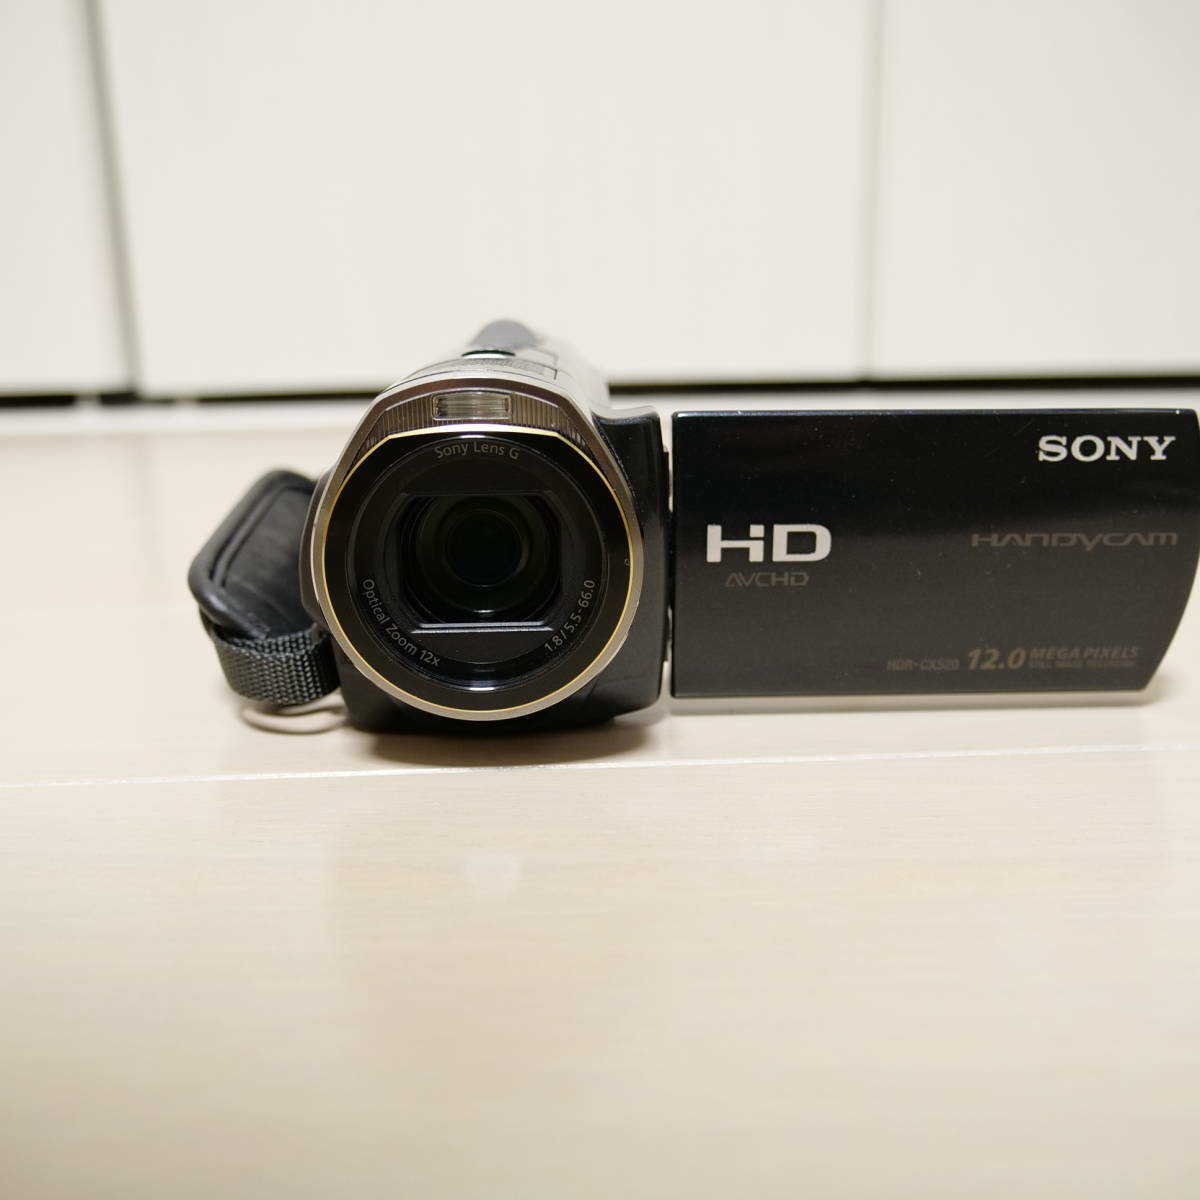 Sony HDR-CX520 (64 GB) Camcorder for sale online | eBay